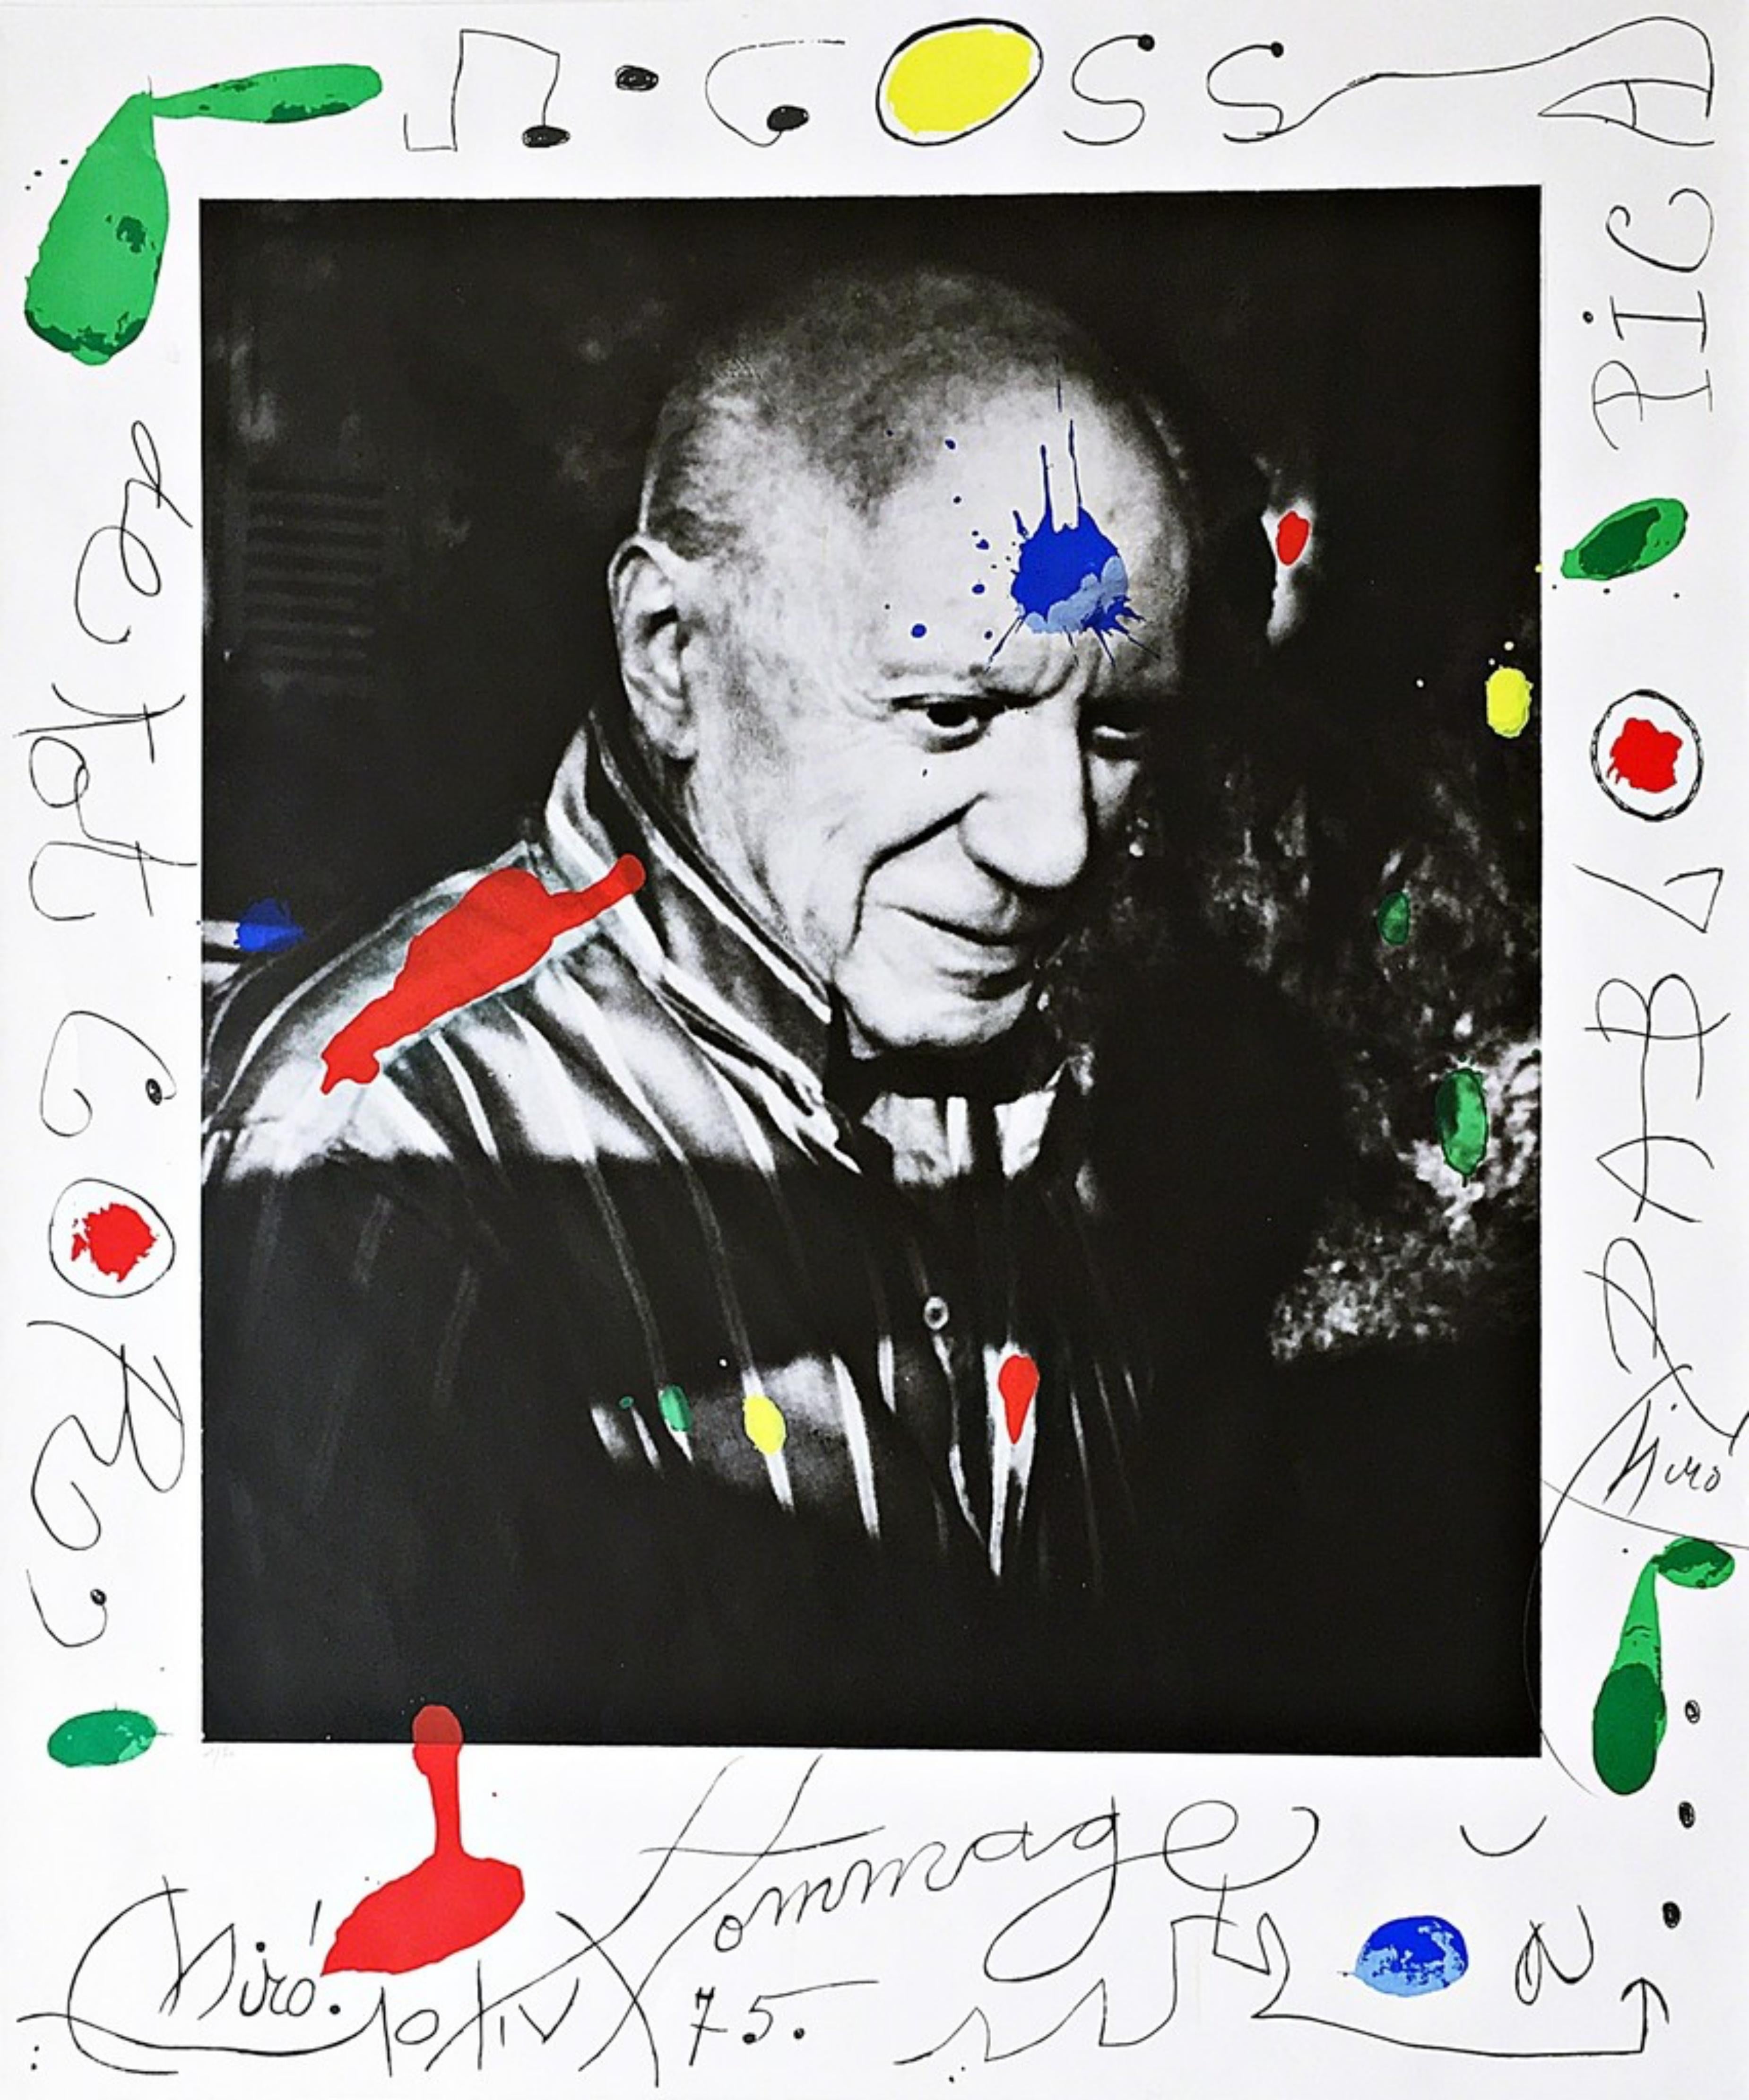 Joan Miró Portrait Print - Hommage à Picasso (Homage to Picasso) limited edition Joan Miro silkscreen 